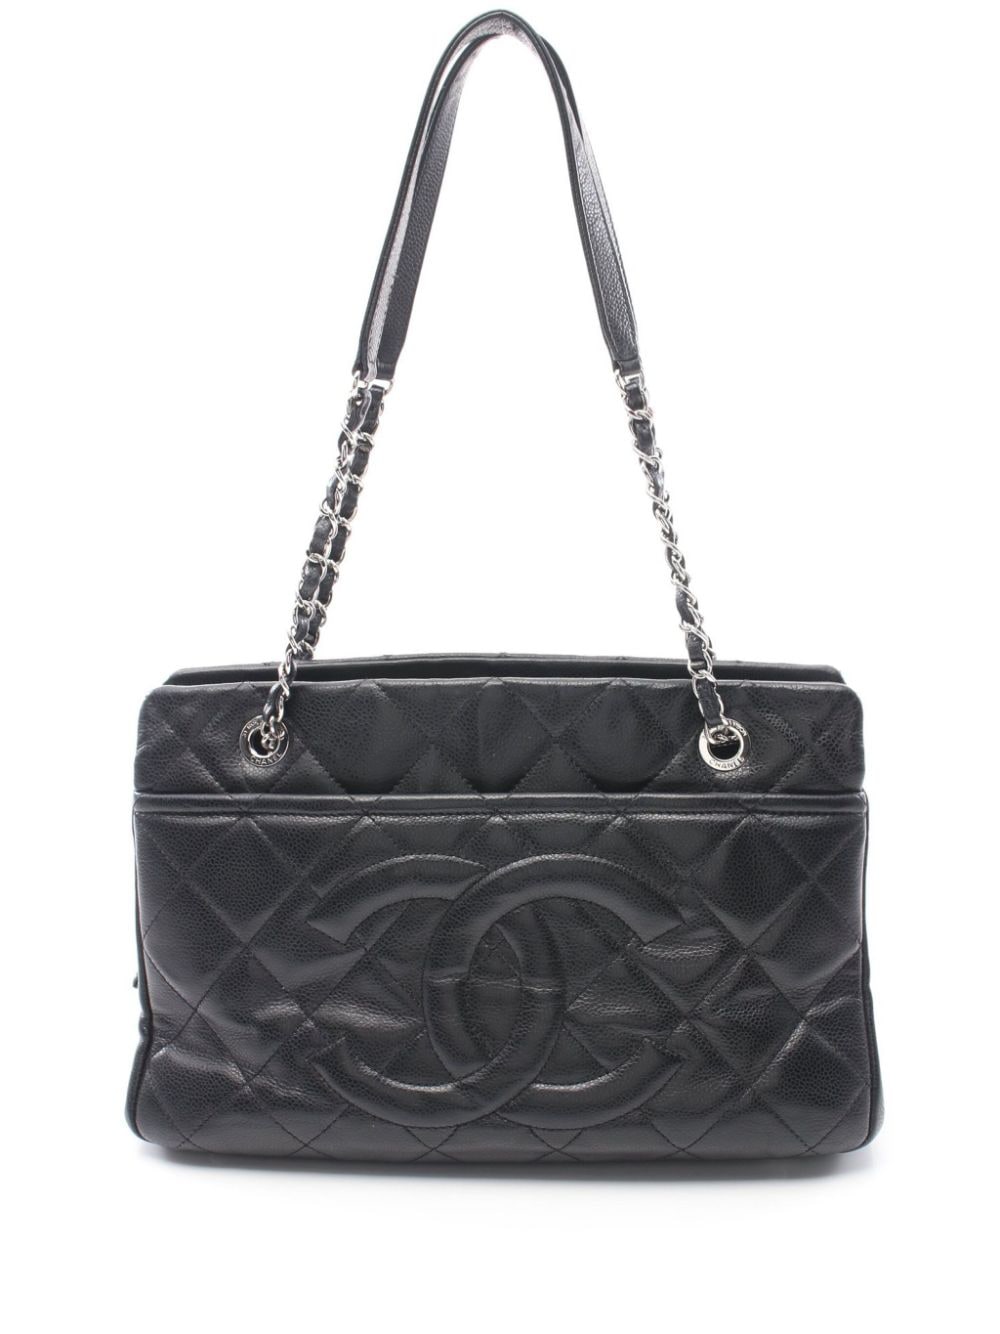 2012-2013 CC stitch diamond-quilted tote bag